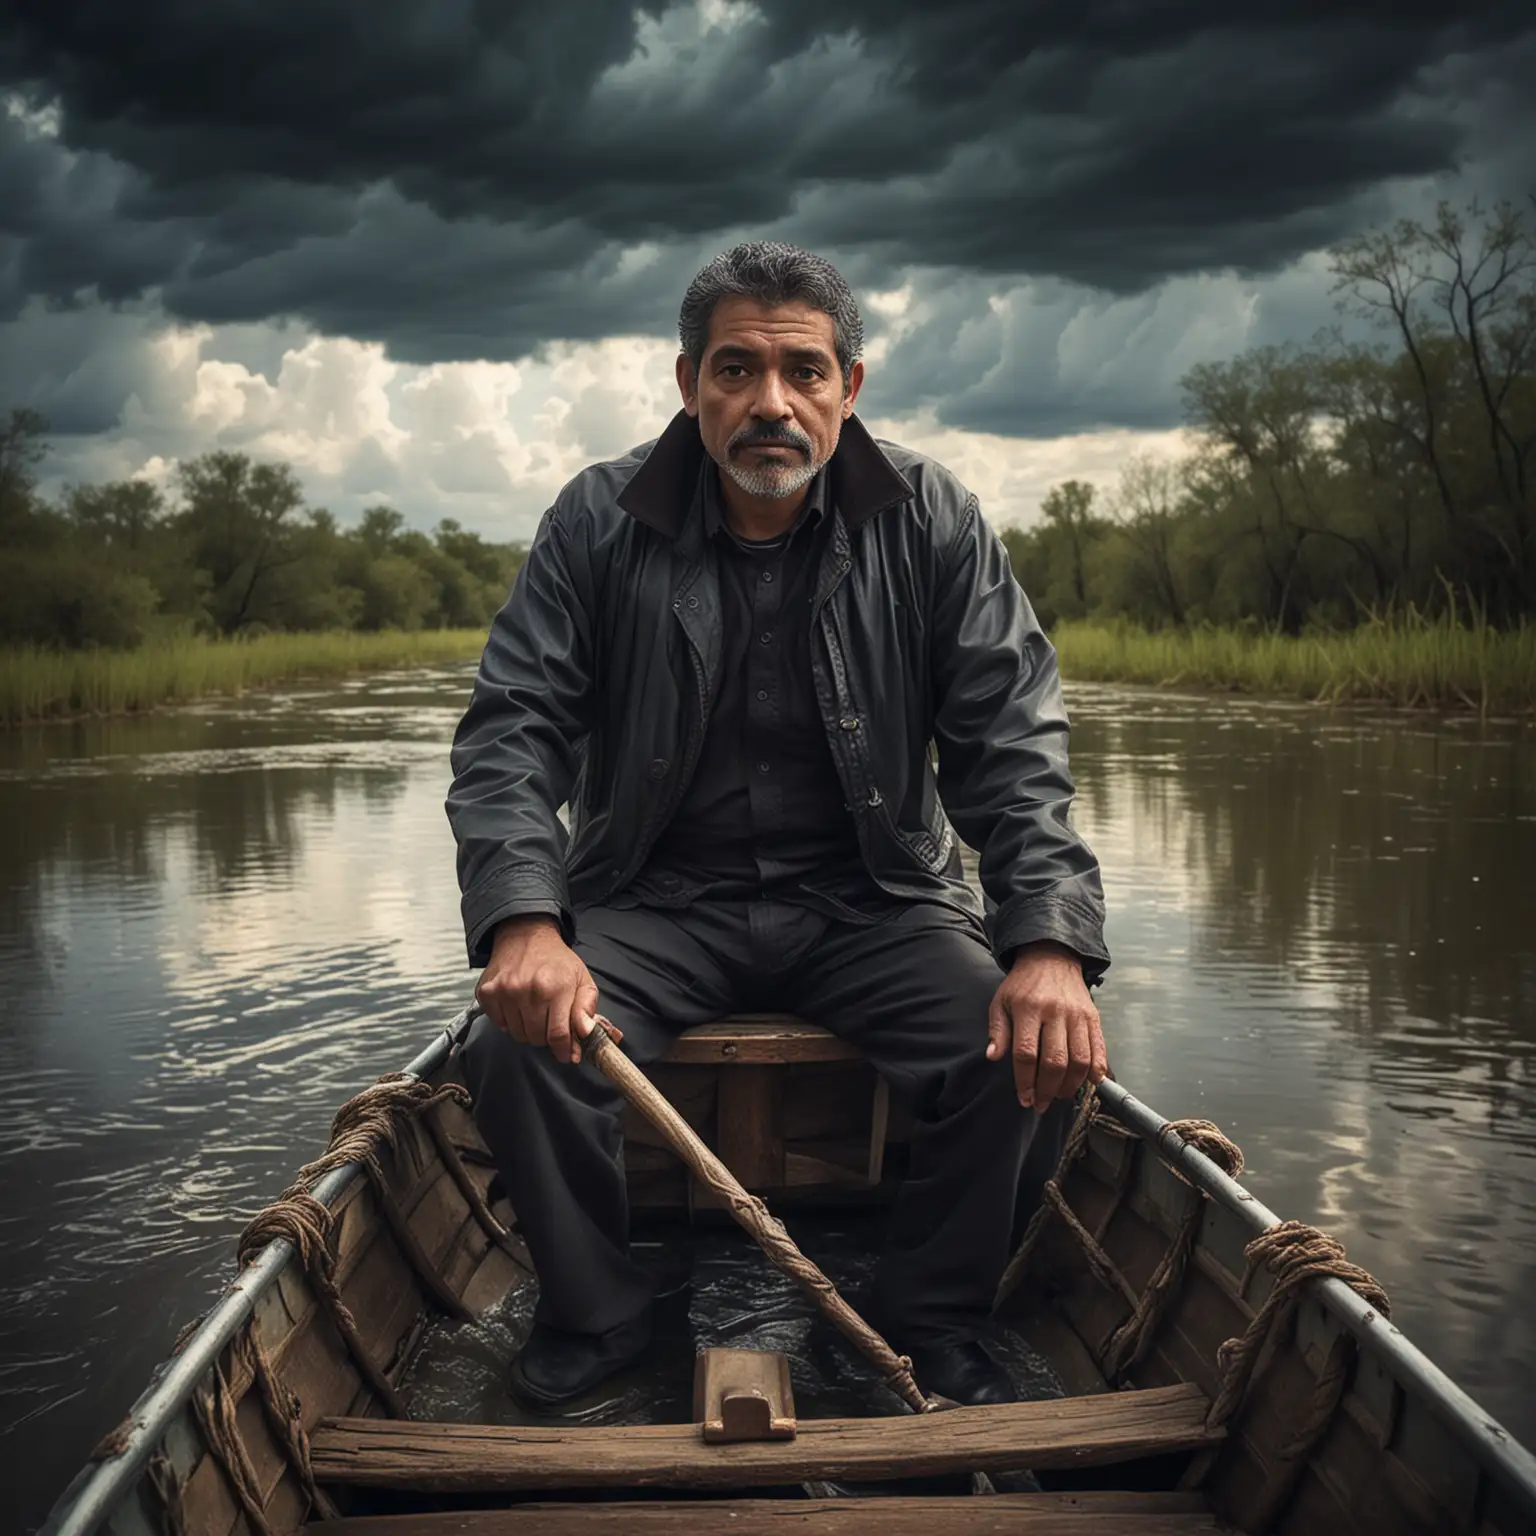 a middle age hispanic man holding a metal cane and sitting in a tiny boat on a river on a cloudy day, vibrant colors, dramatic lighting